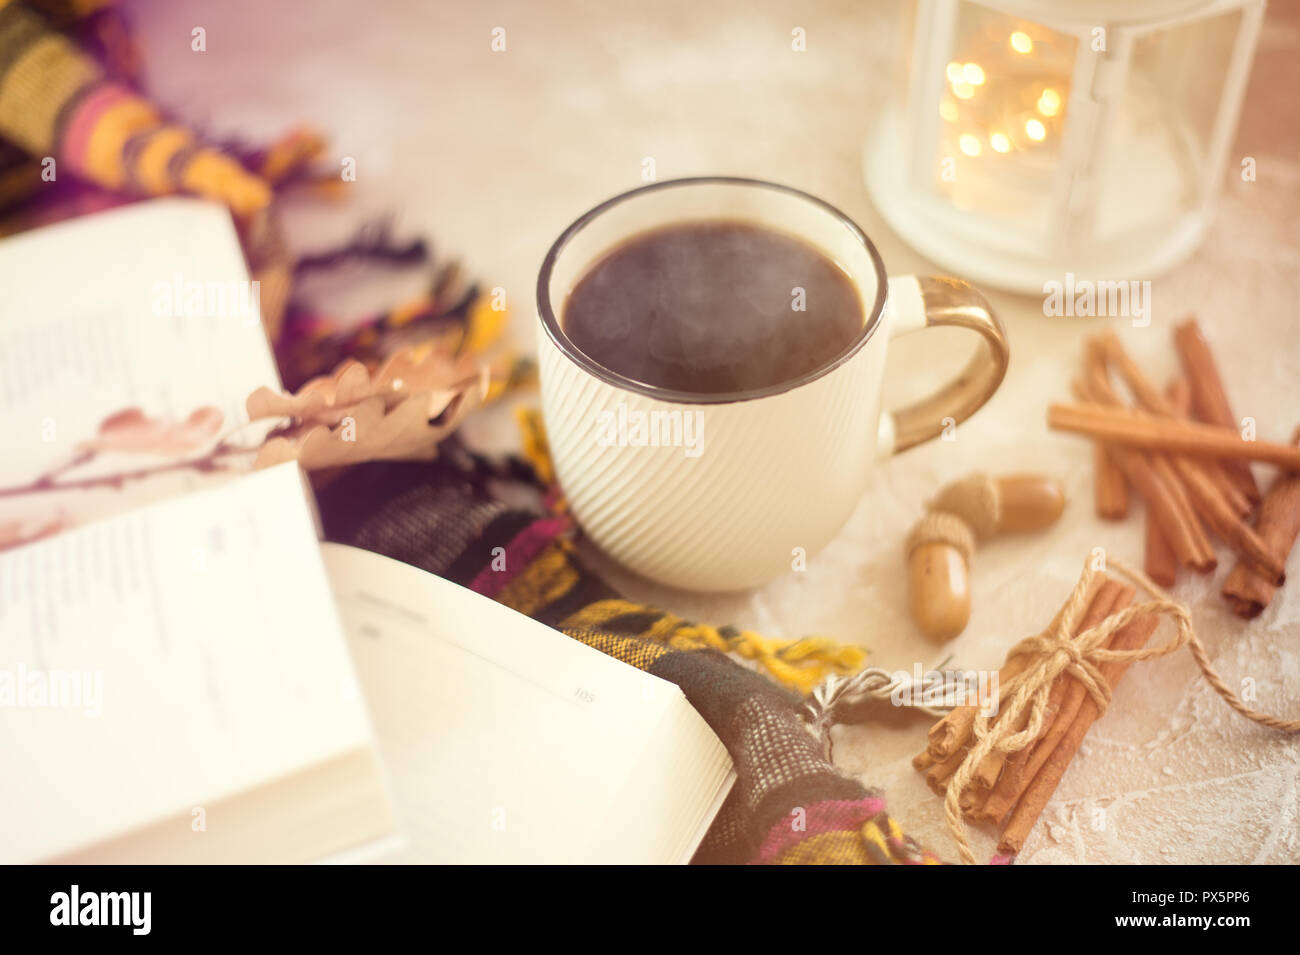 Autumn composition. Cup of coffee, blanket, autumn leaves, cinnamon sticks on beige background Stock Photo